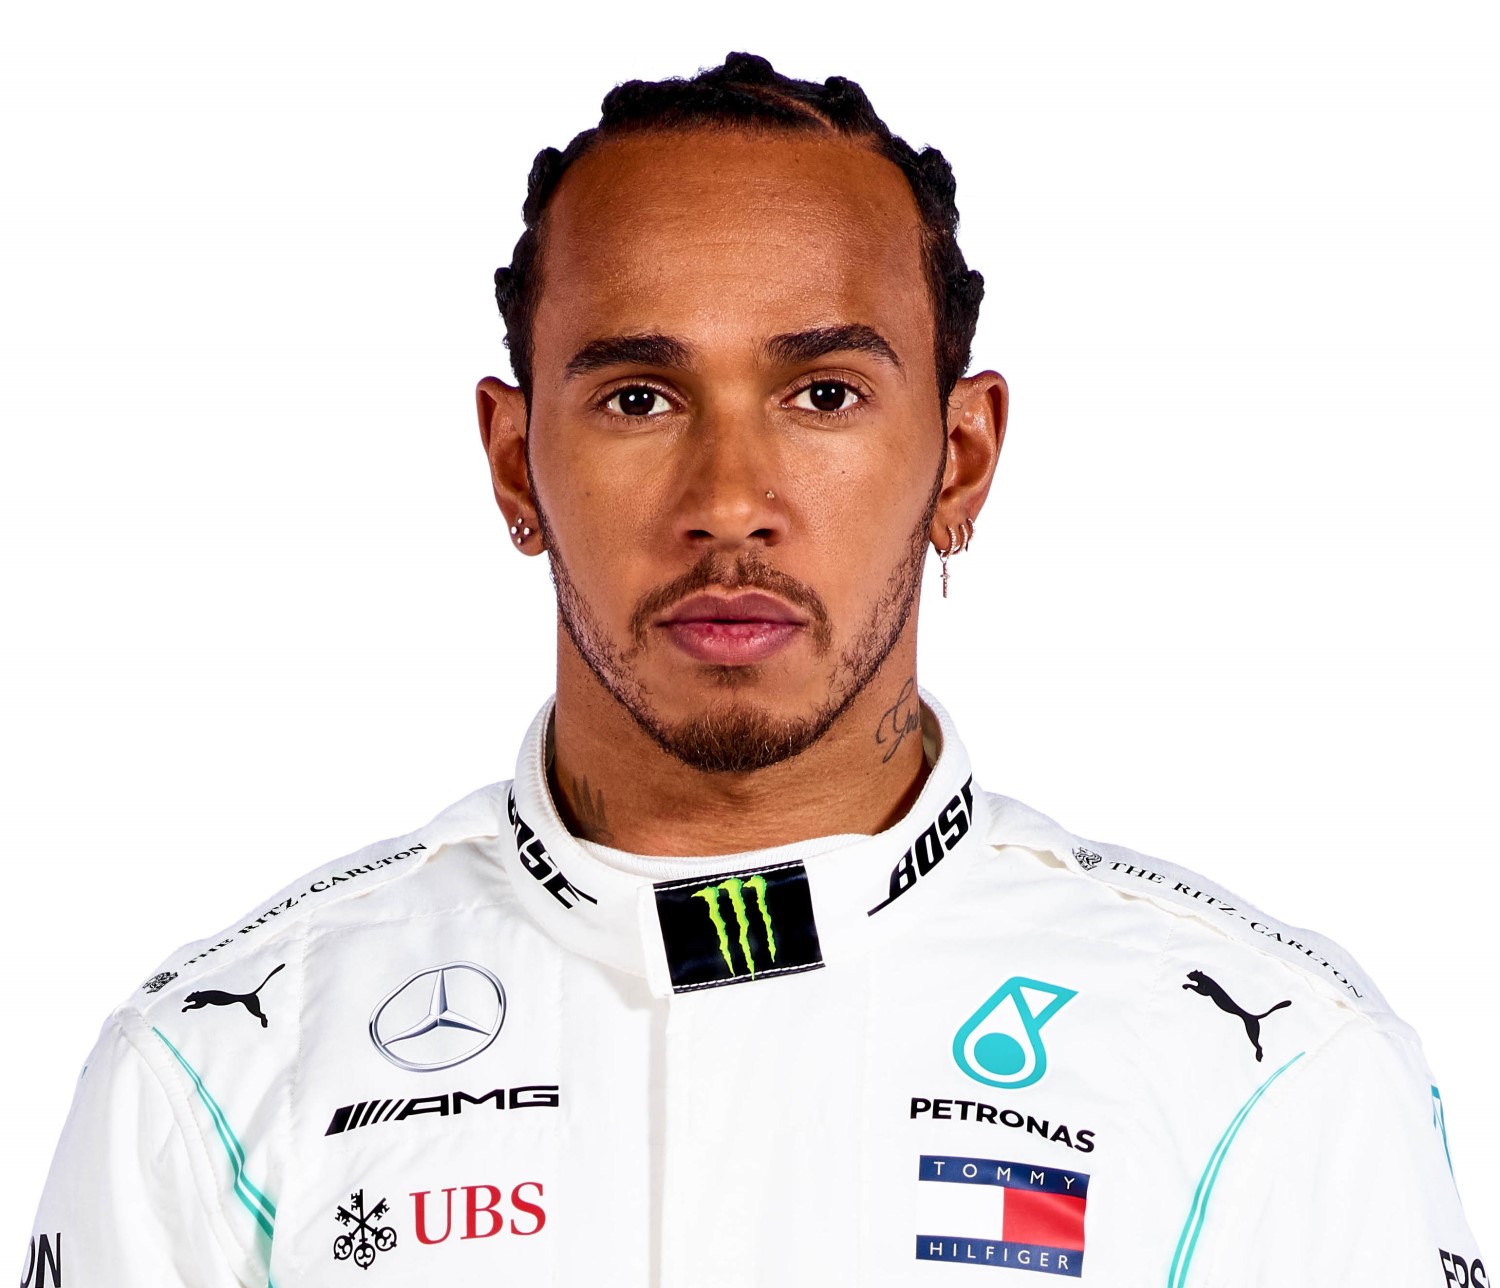 Hamilton is not going anywhere unless Aldo Costa, who has left Mercedes, decides to start designing F1 cars again